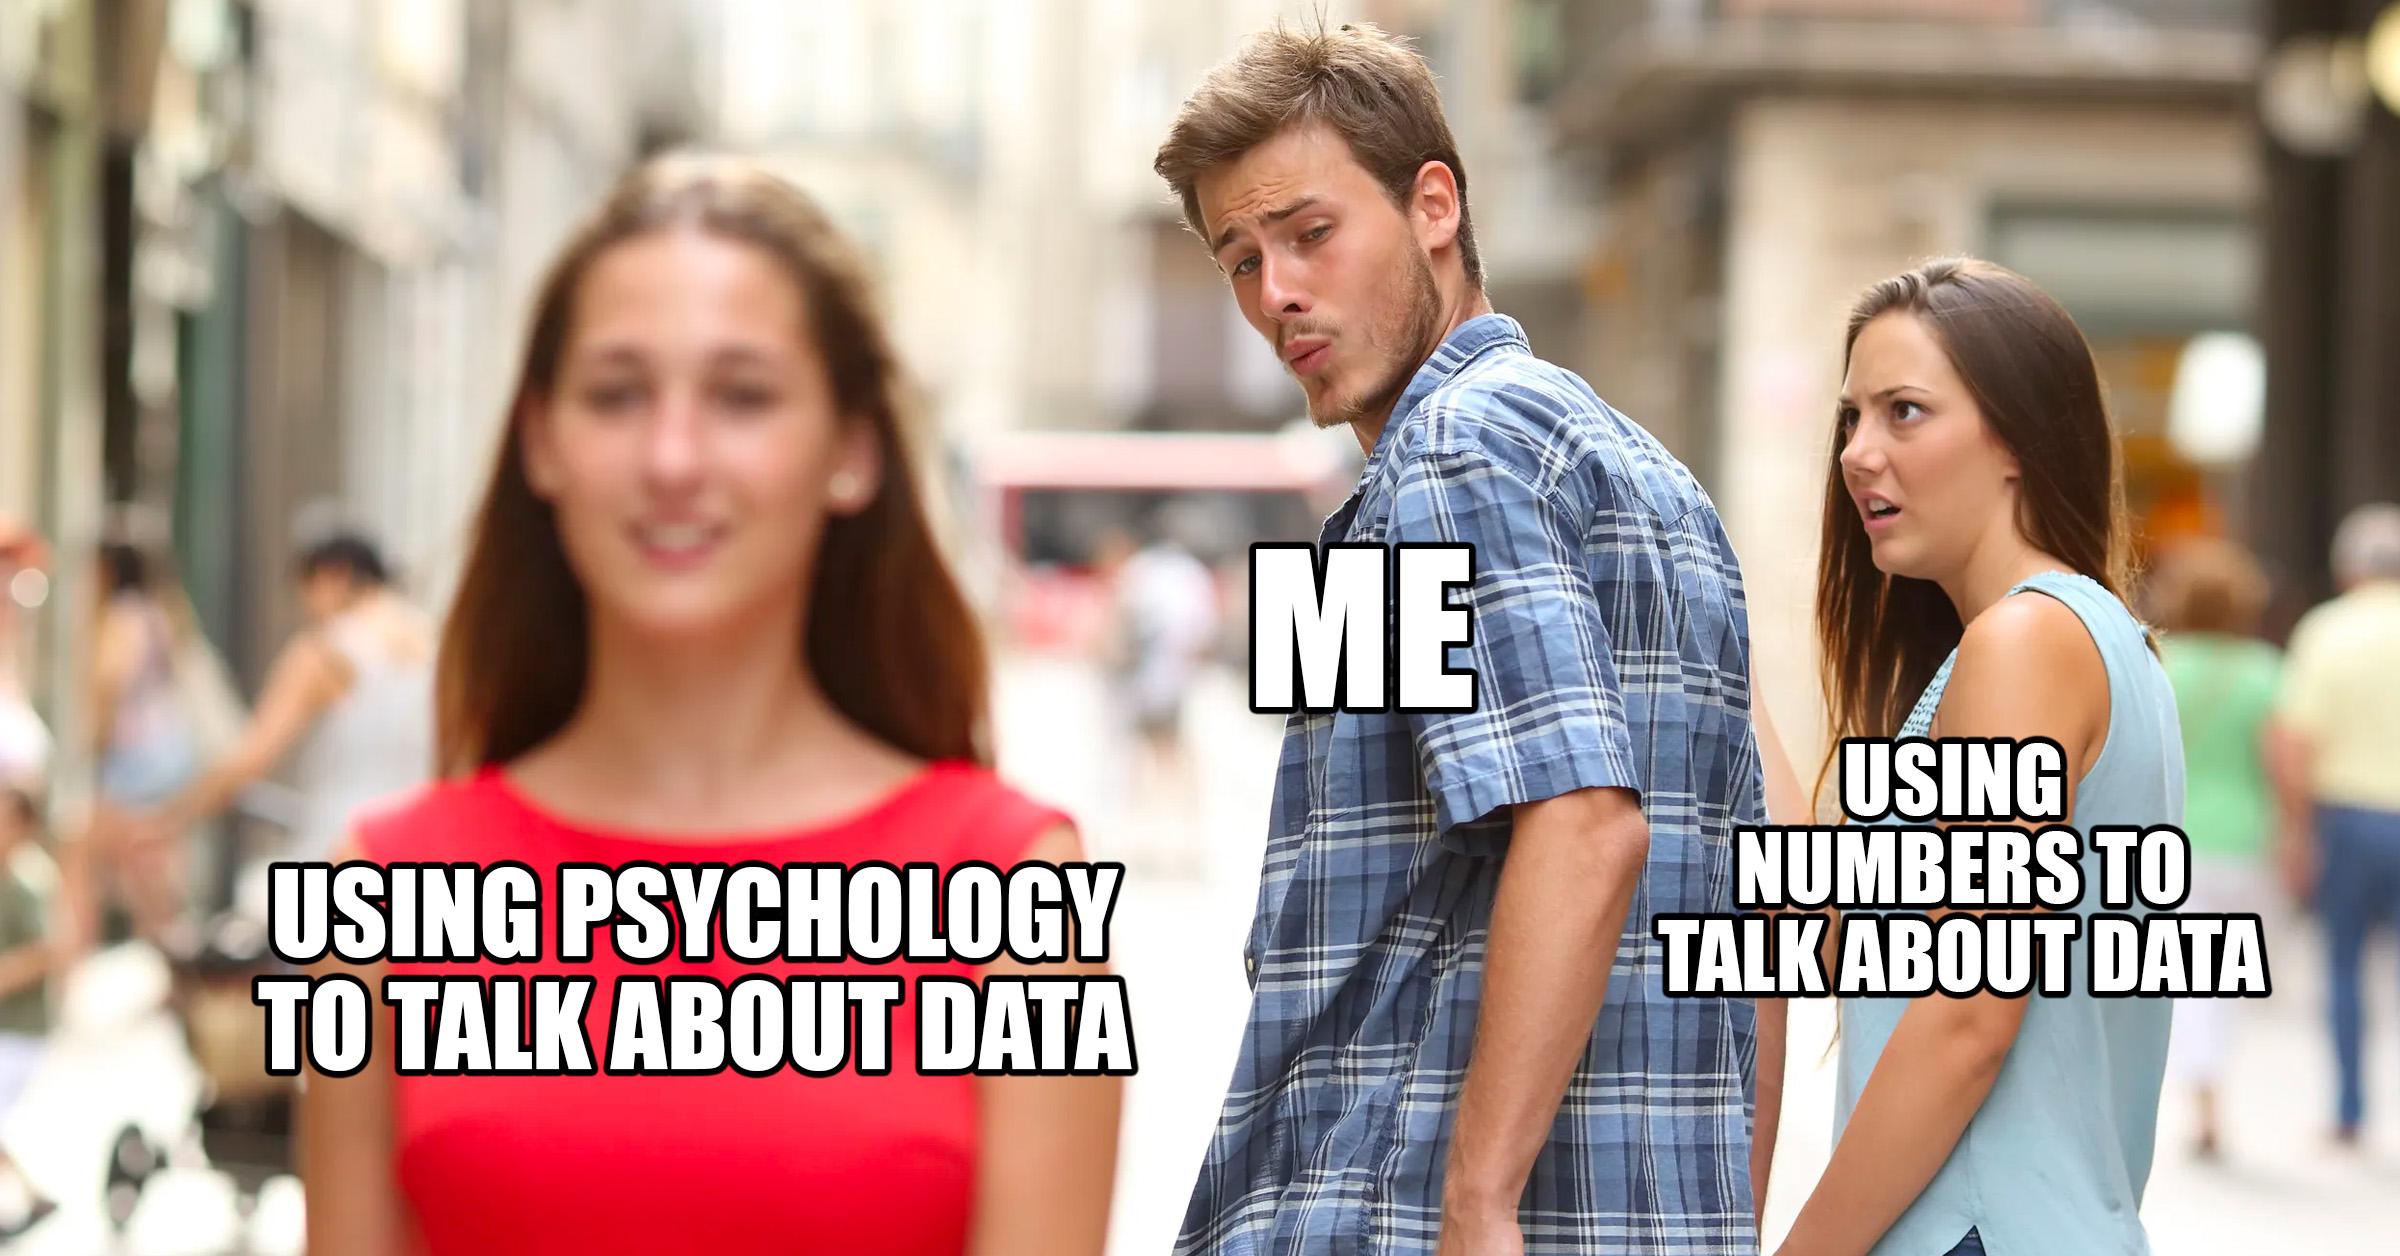 Distracted boyfriend meme. Label on girl drawing attention: "using psychology to talk about data." Label on boyfriend: "Me." Label on angry girlfriend: "Using numbers to talk about data."